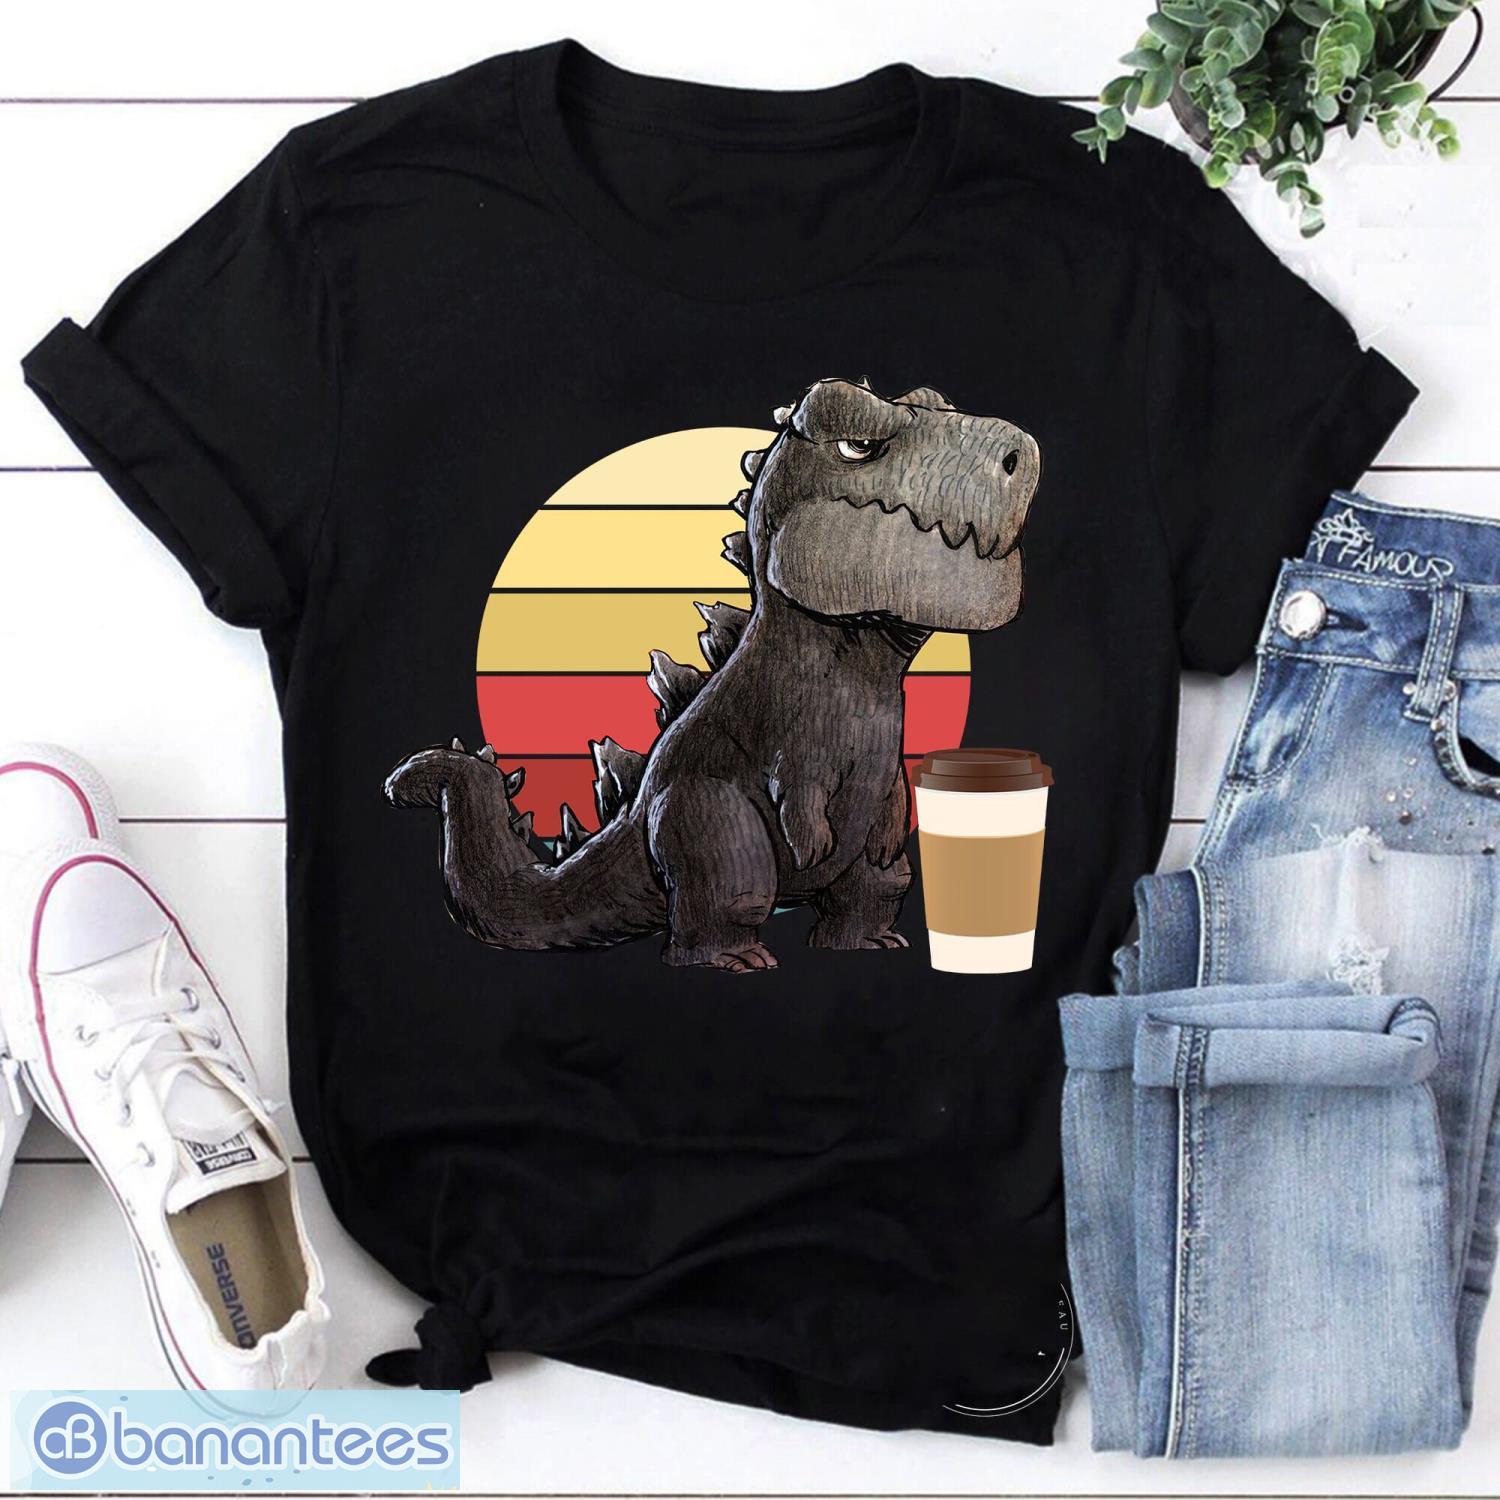 Vintage Coffee First Destroy Later Godzilla With Coffee Vintage T-Shirt, Godzilla Shirt, Scary Godzilla Shirt Product Photo 1